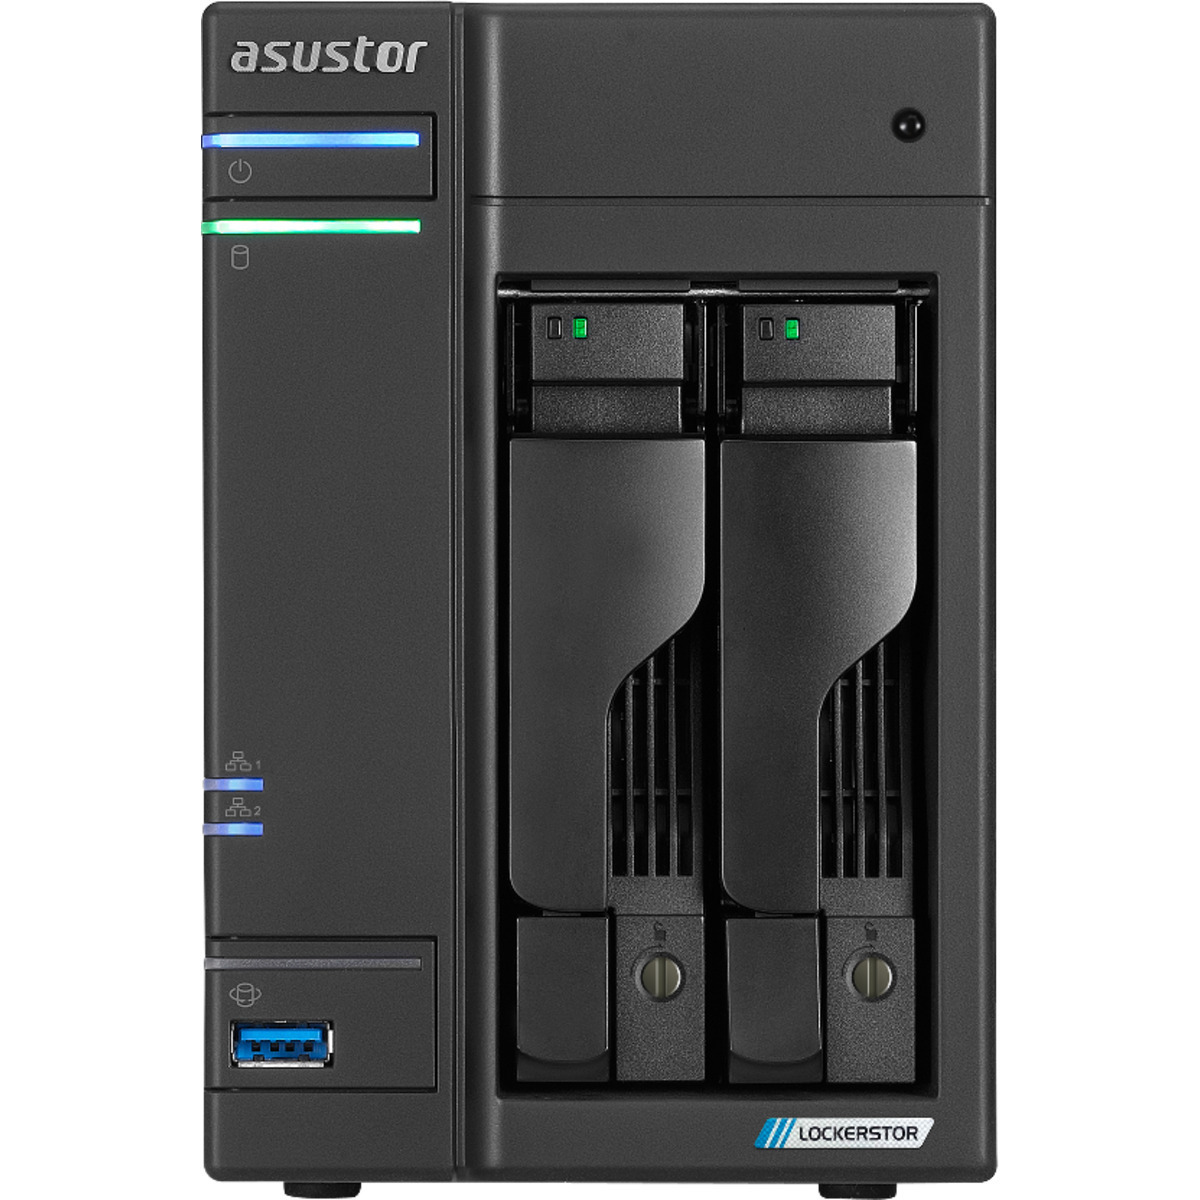 ASUSTOR LOCKERSTOR 2 Gen2 AS6702T 4tb 2-Bay Desktop Multimedia / Power User / Business NAS - Network Attached Storage Device 2x2tb Samsung 870 QVO MZ-77Q2T0 2.5 560/530MB/s SATA 6Gb/s SSD CONSUMER Class Drives Installed - Burn-In Tested - FREE RAM UPGRADE LOCKERSTOR 2 Gen2 AS6702T